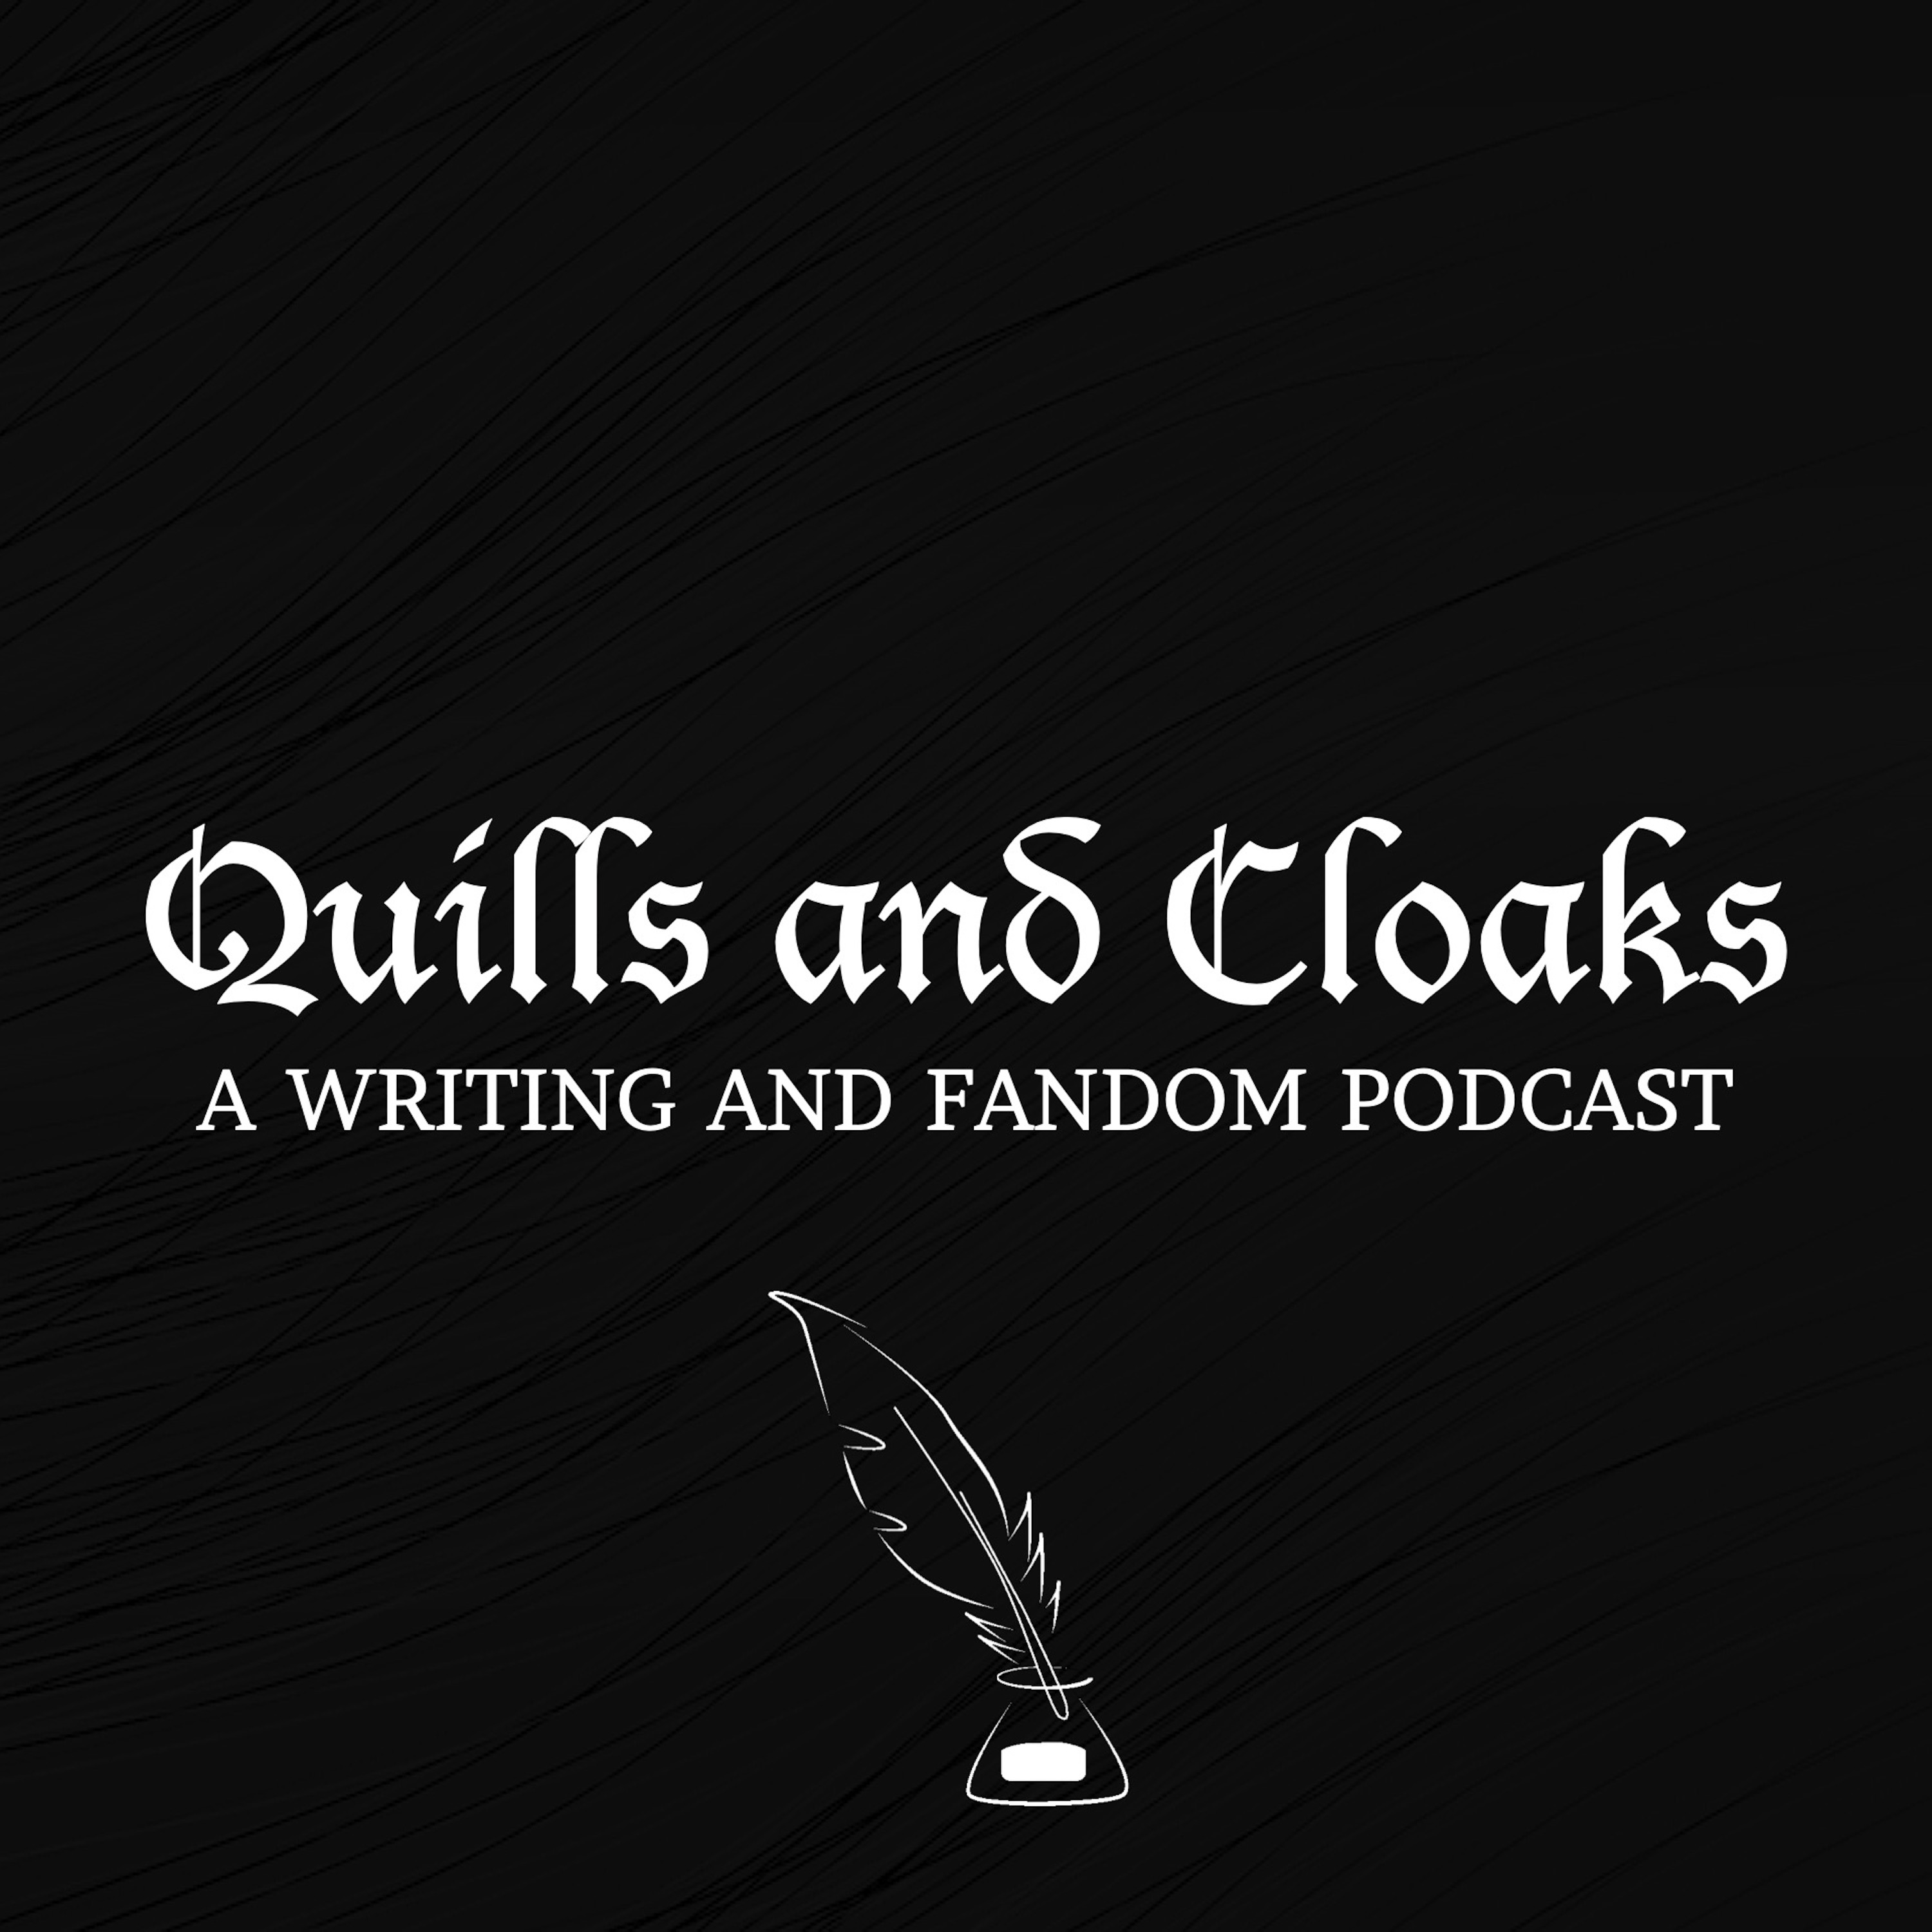 Quills and Cloaks: A Writing and Fandom Podcast